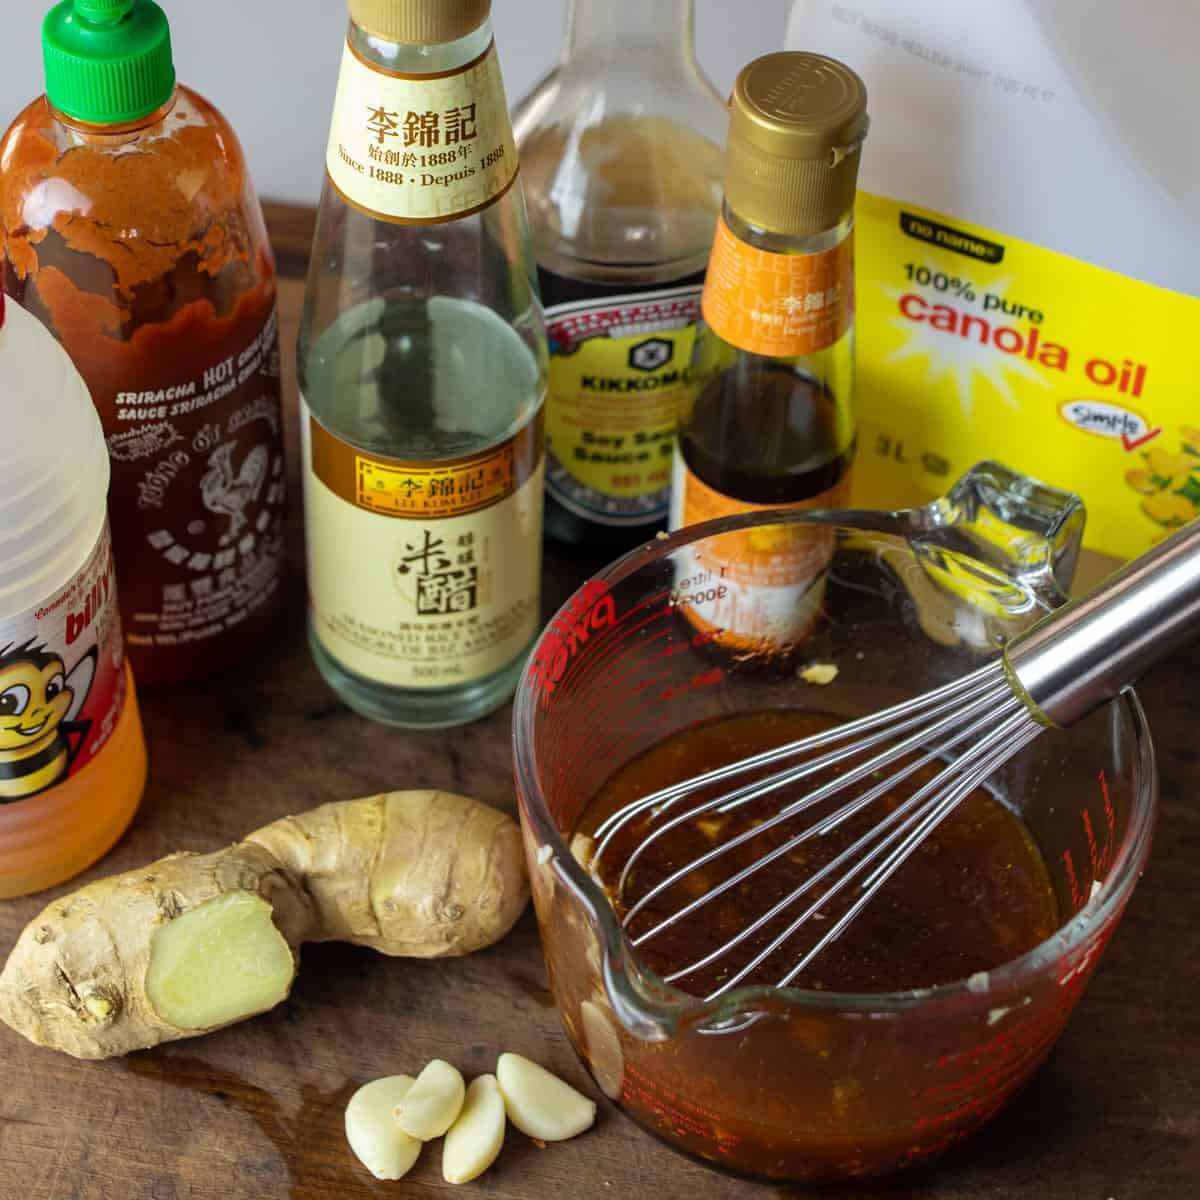 Salad dressing mixed in a measuring bowl with ingredient bottles surrounding.